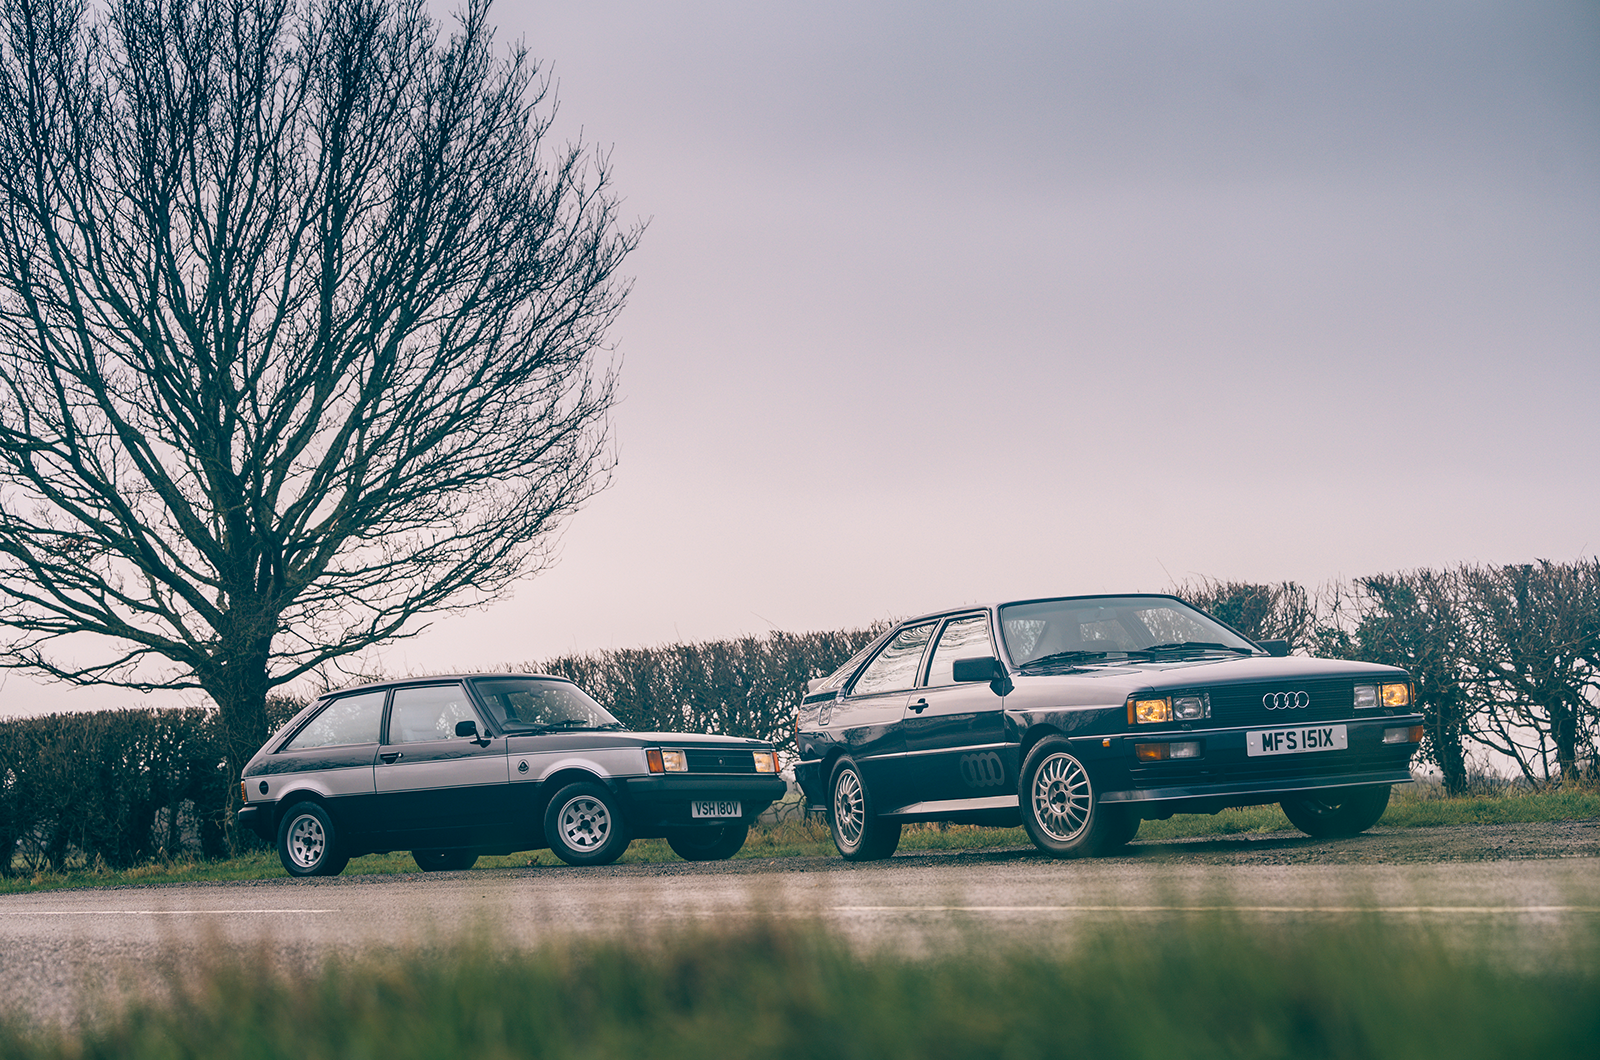 Classic & Sports Car – Changing of the guard: Talbot Sunbeam Lotus and Audi quattro